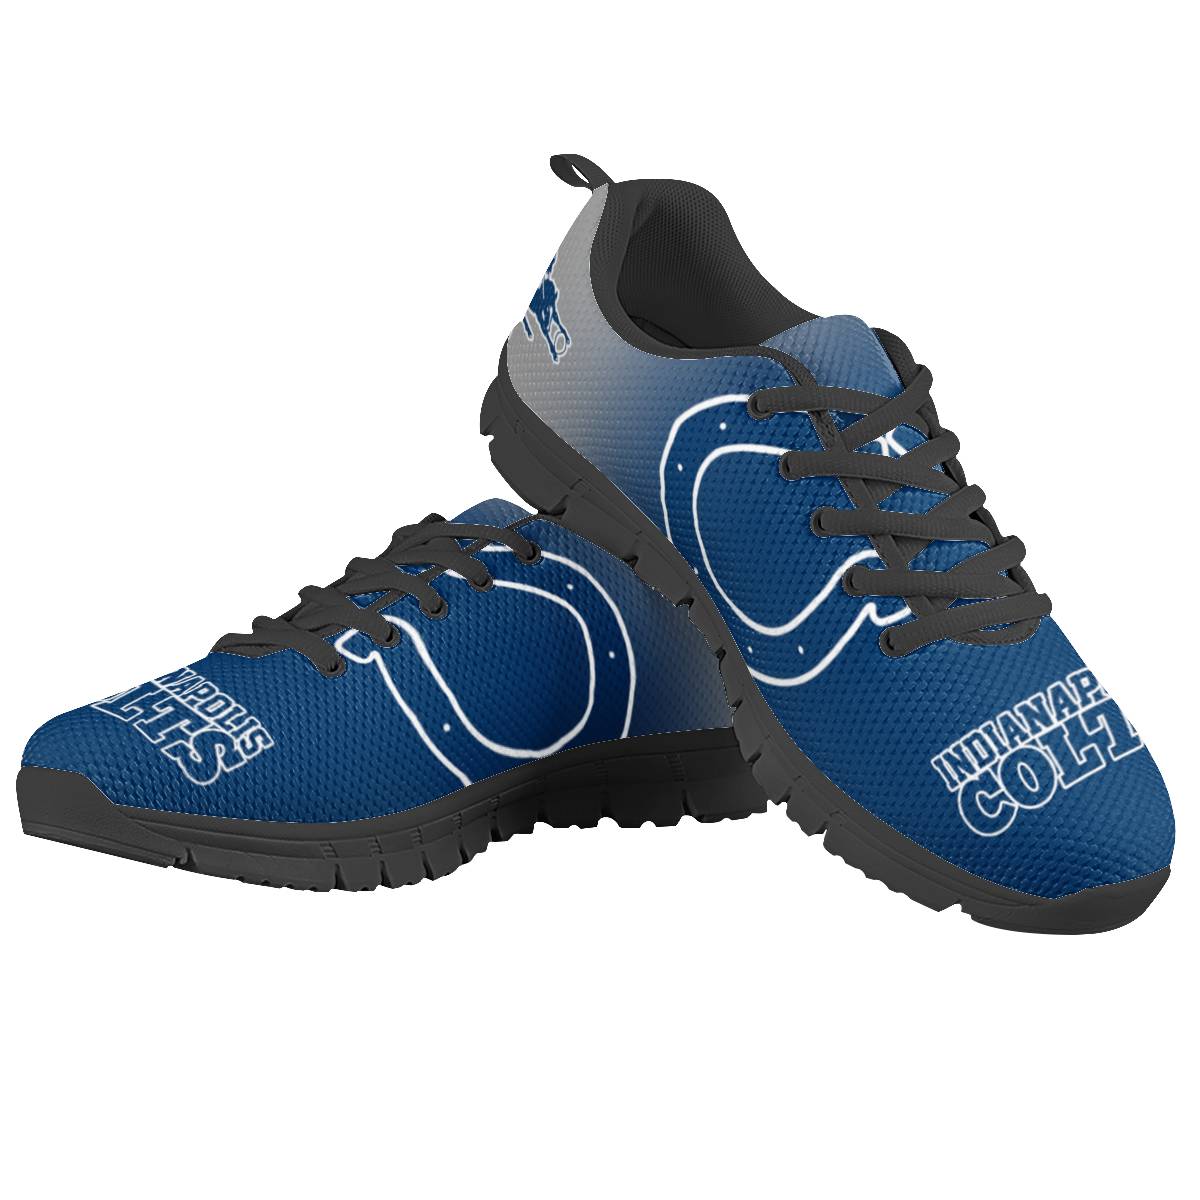 Men's Indianapolis Colts AQ Running Shoes 002